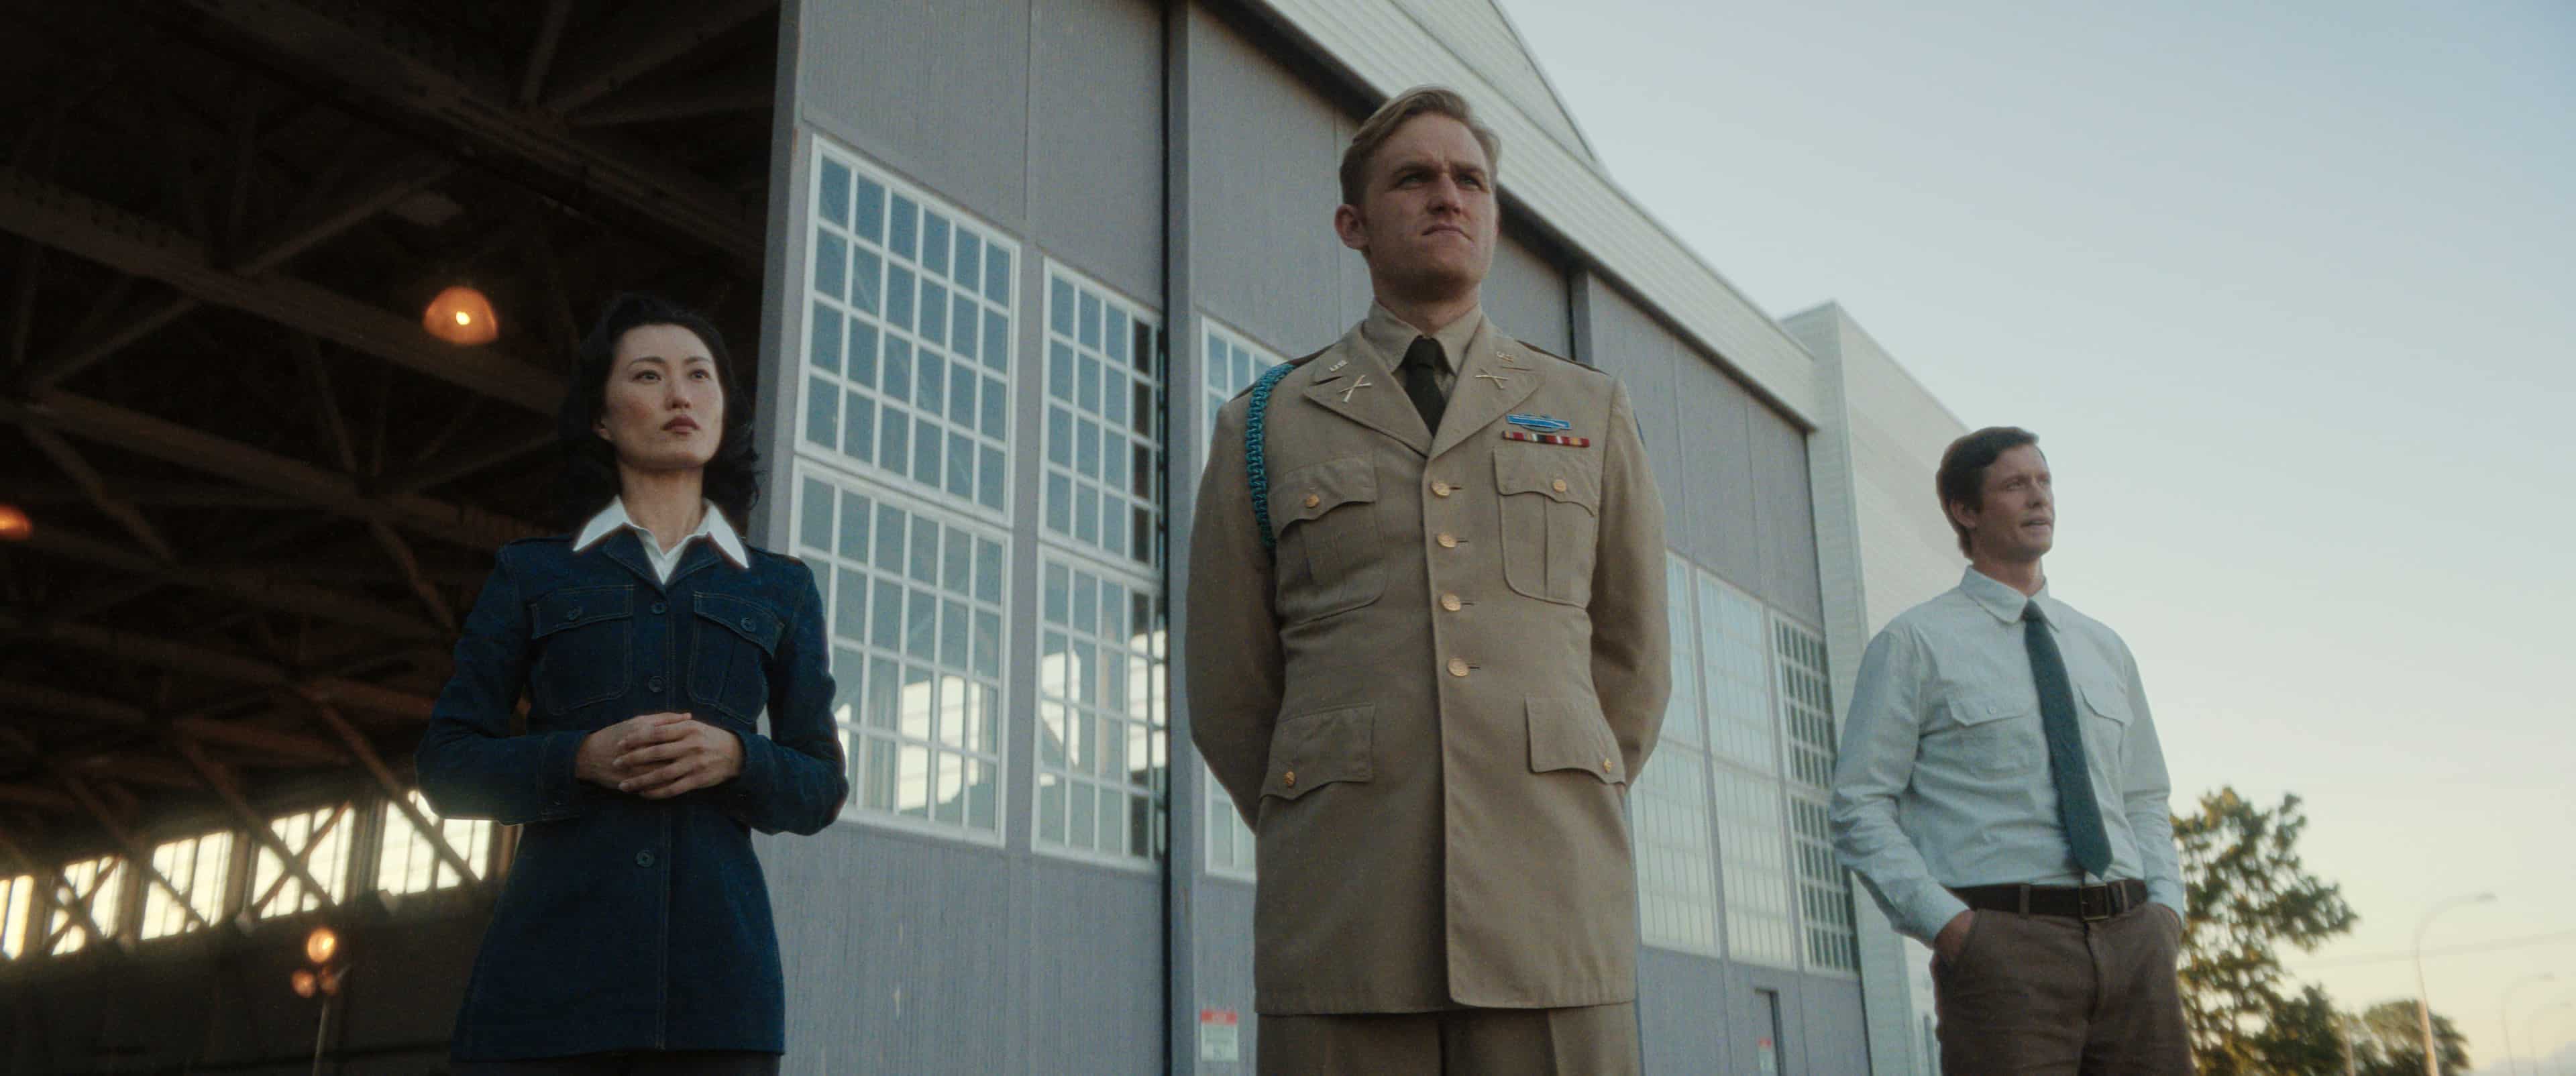 Mari Yamamoto, Wyatt Russell and Anders Holm in Monarch: Legacy of Monsters. They are wearing 50s clothes and standing in front of a large hanger.